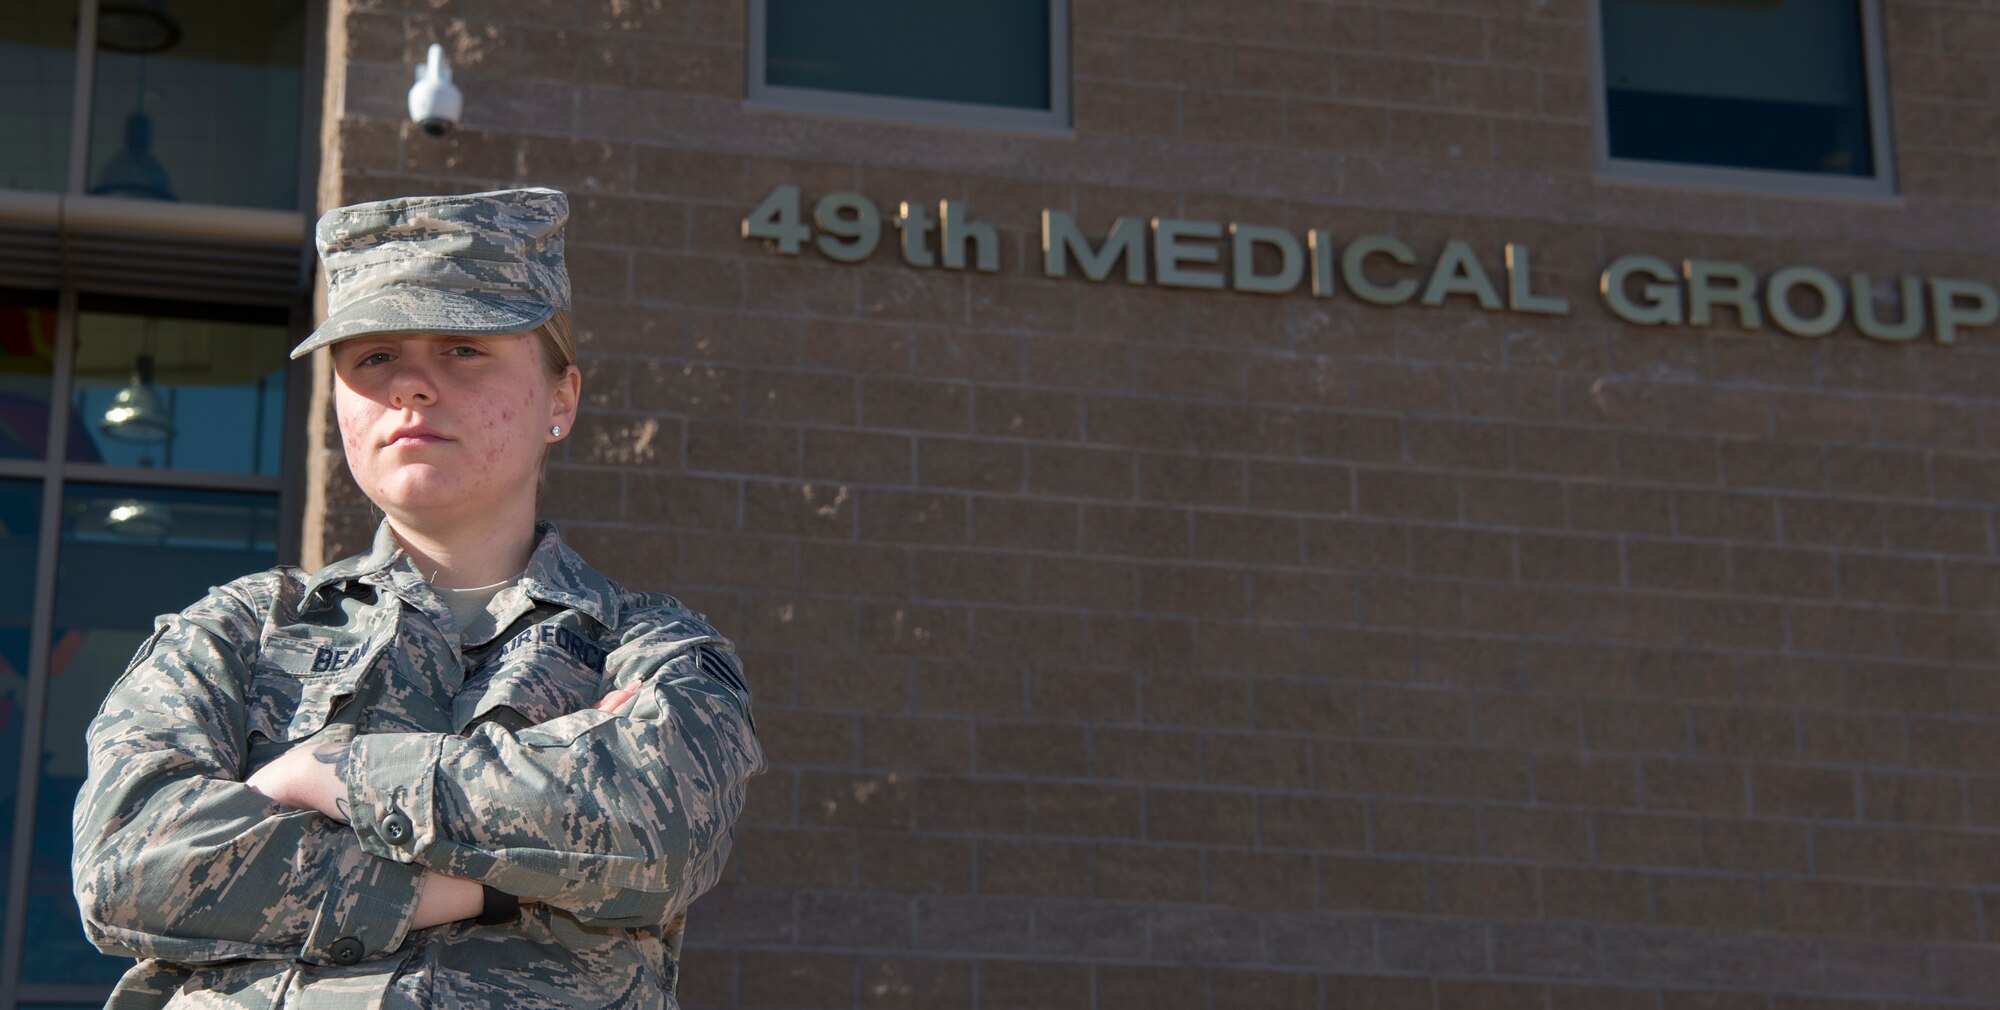 Senior Airman Hali Bean, 49th Medical Group Family Health front desk clerk, poses for a portrait, Feb. 7, 2019, on Holloman Air Force Base, N.M. Bean has been working on Holloman for almost three years and had her first encounter with a code blue this January. (U.S. Air Force photo by Airman 1st Class Quion Lowe)